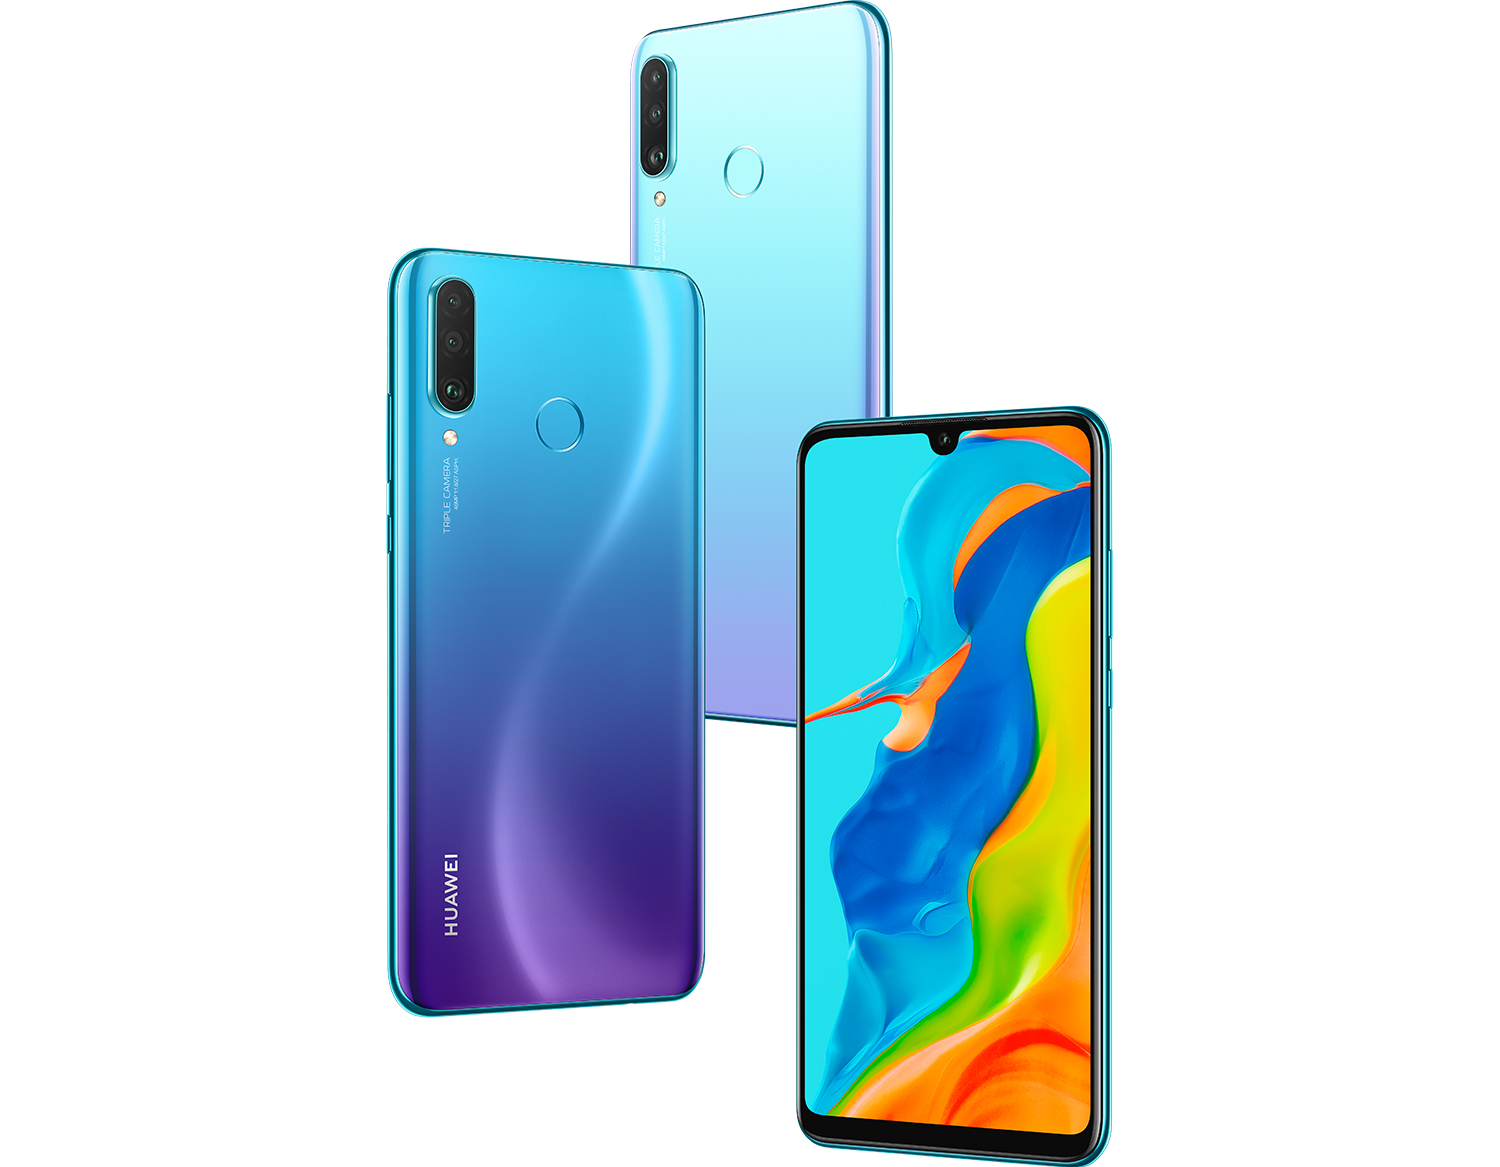 Aunt satire Disgrace Huawei P30 Lite New Edition Smartphone Review – High-End Memory -  NotebookCheck.net Reviews